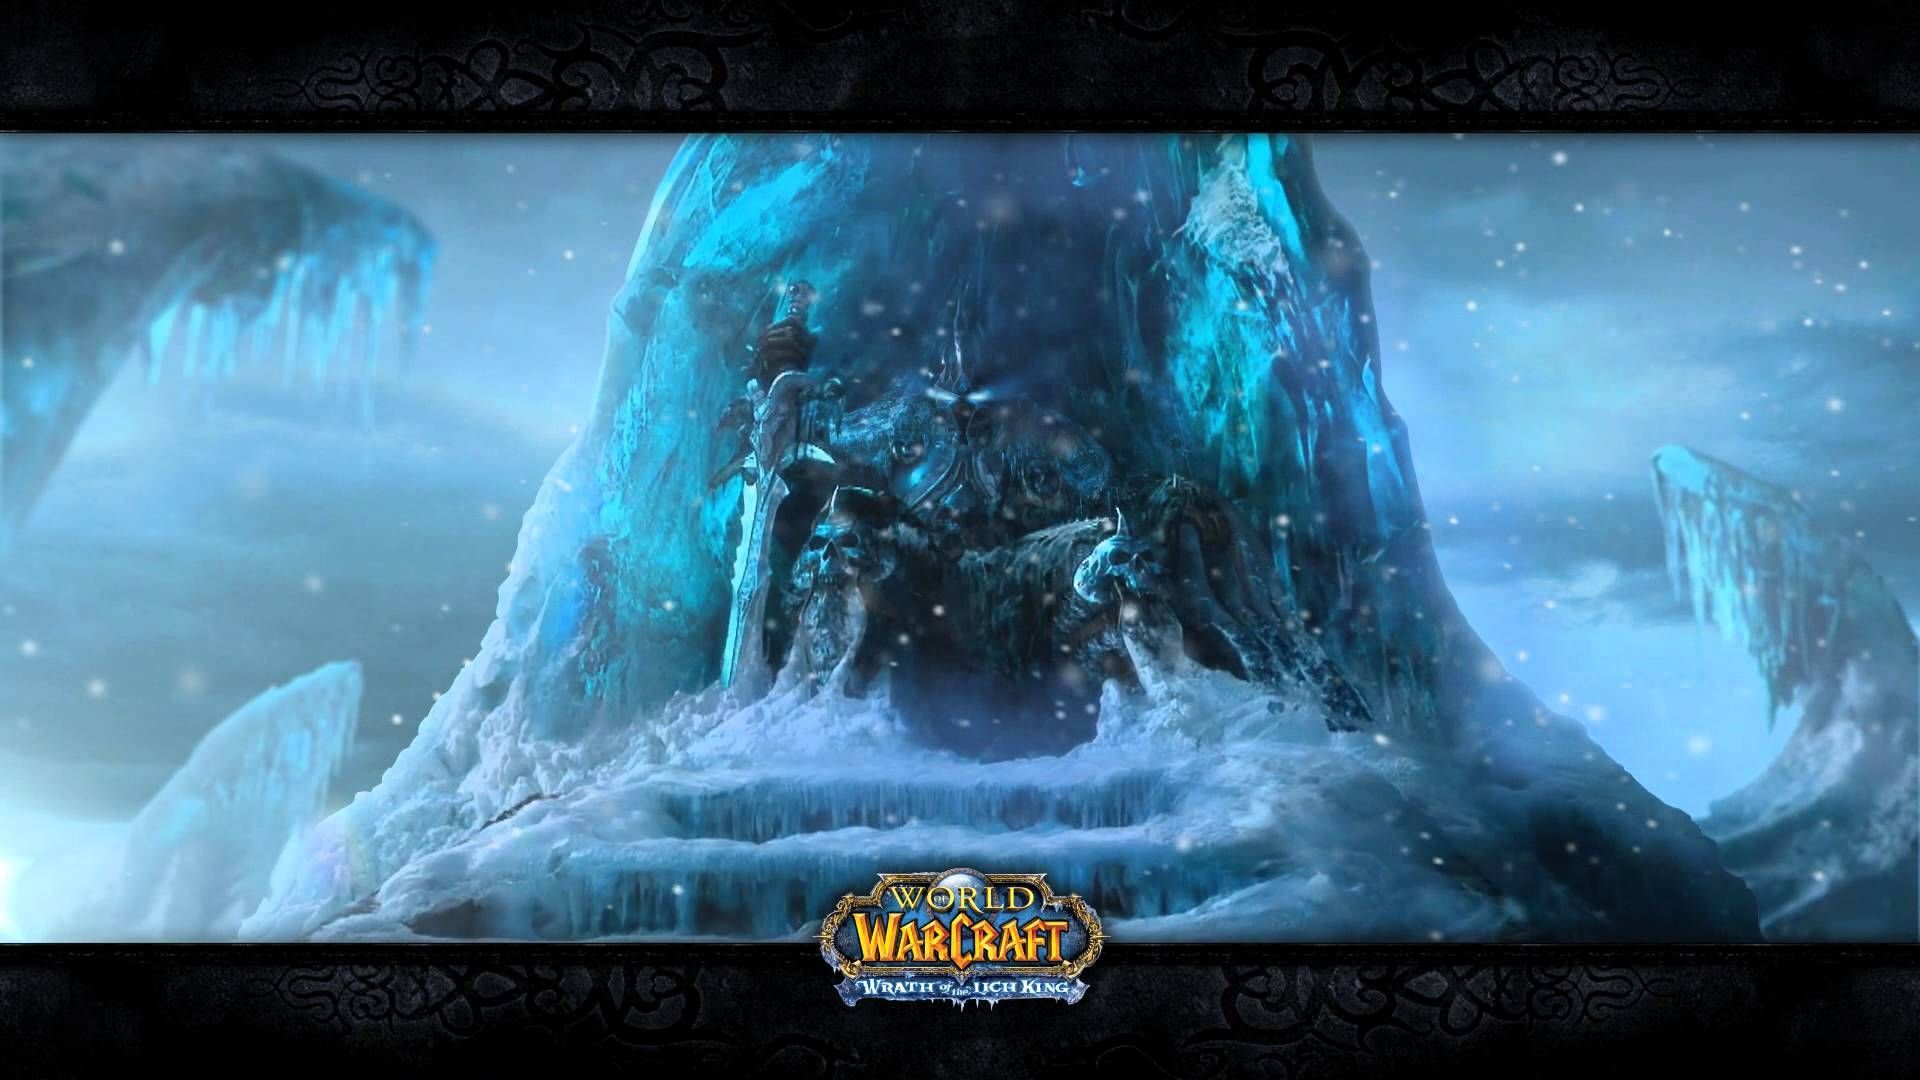 Found this cool animated Lich King wallpaper. #worldofwarcraft